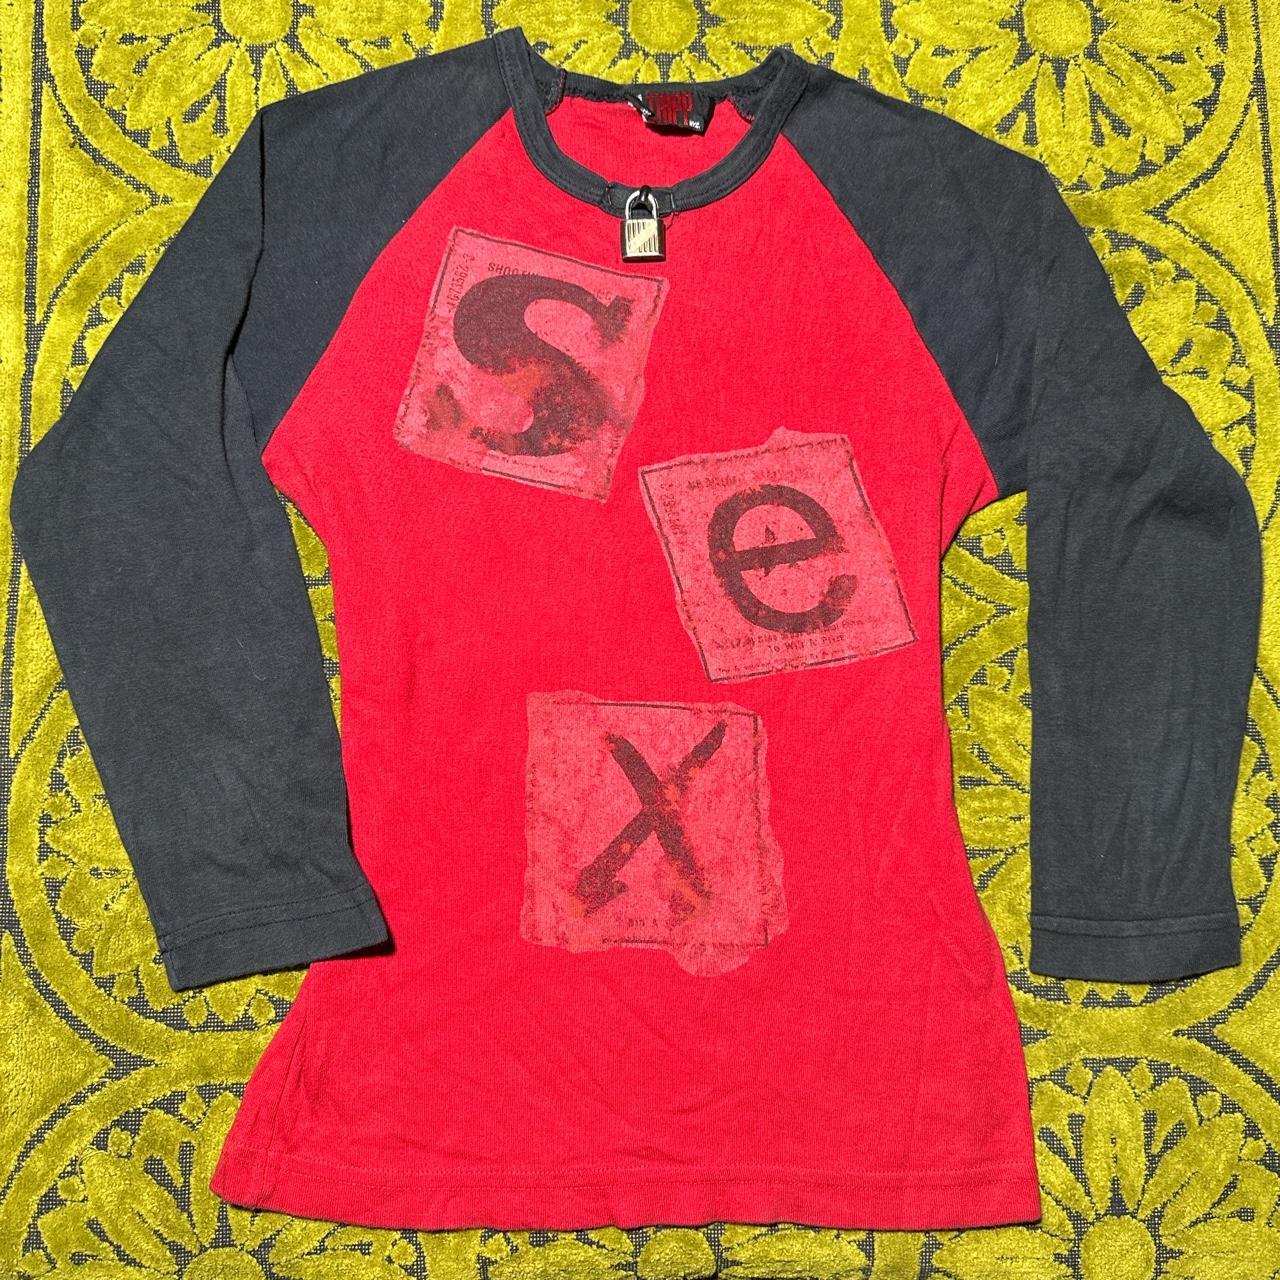 New women's Louis Vuitton red lips graphic tee. Red - Depop